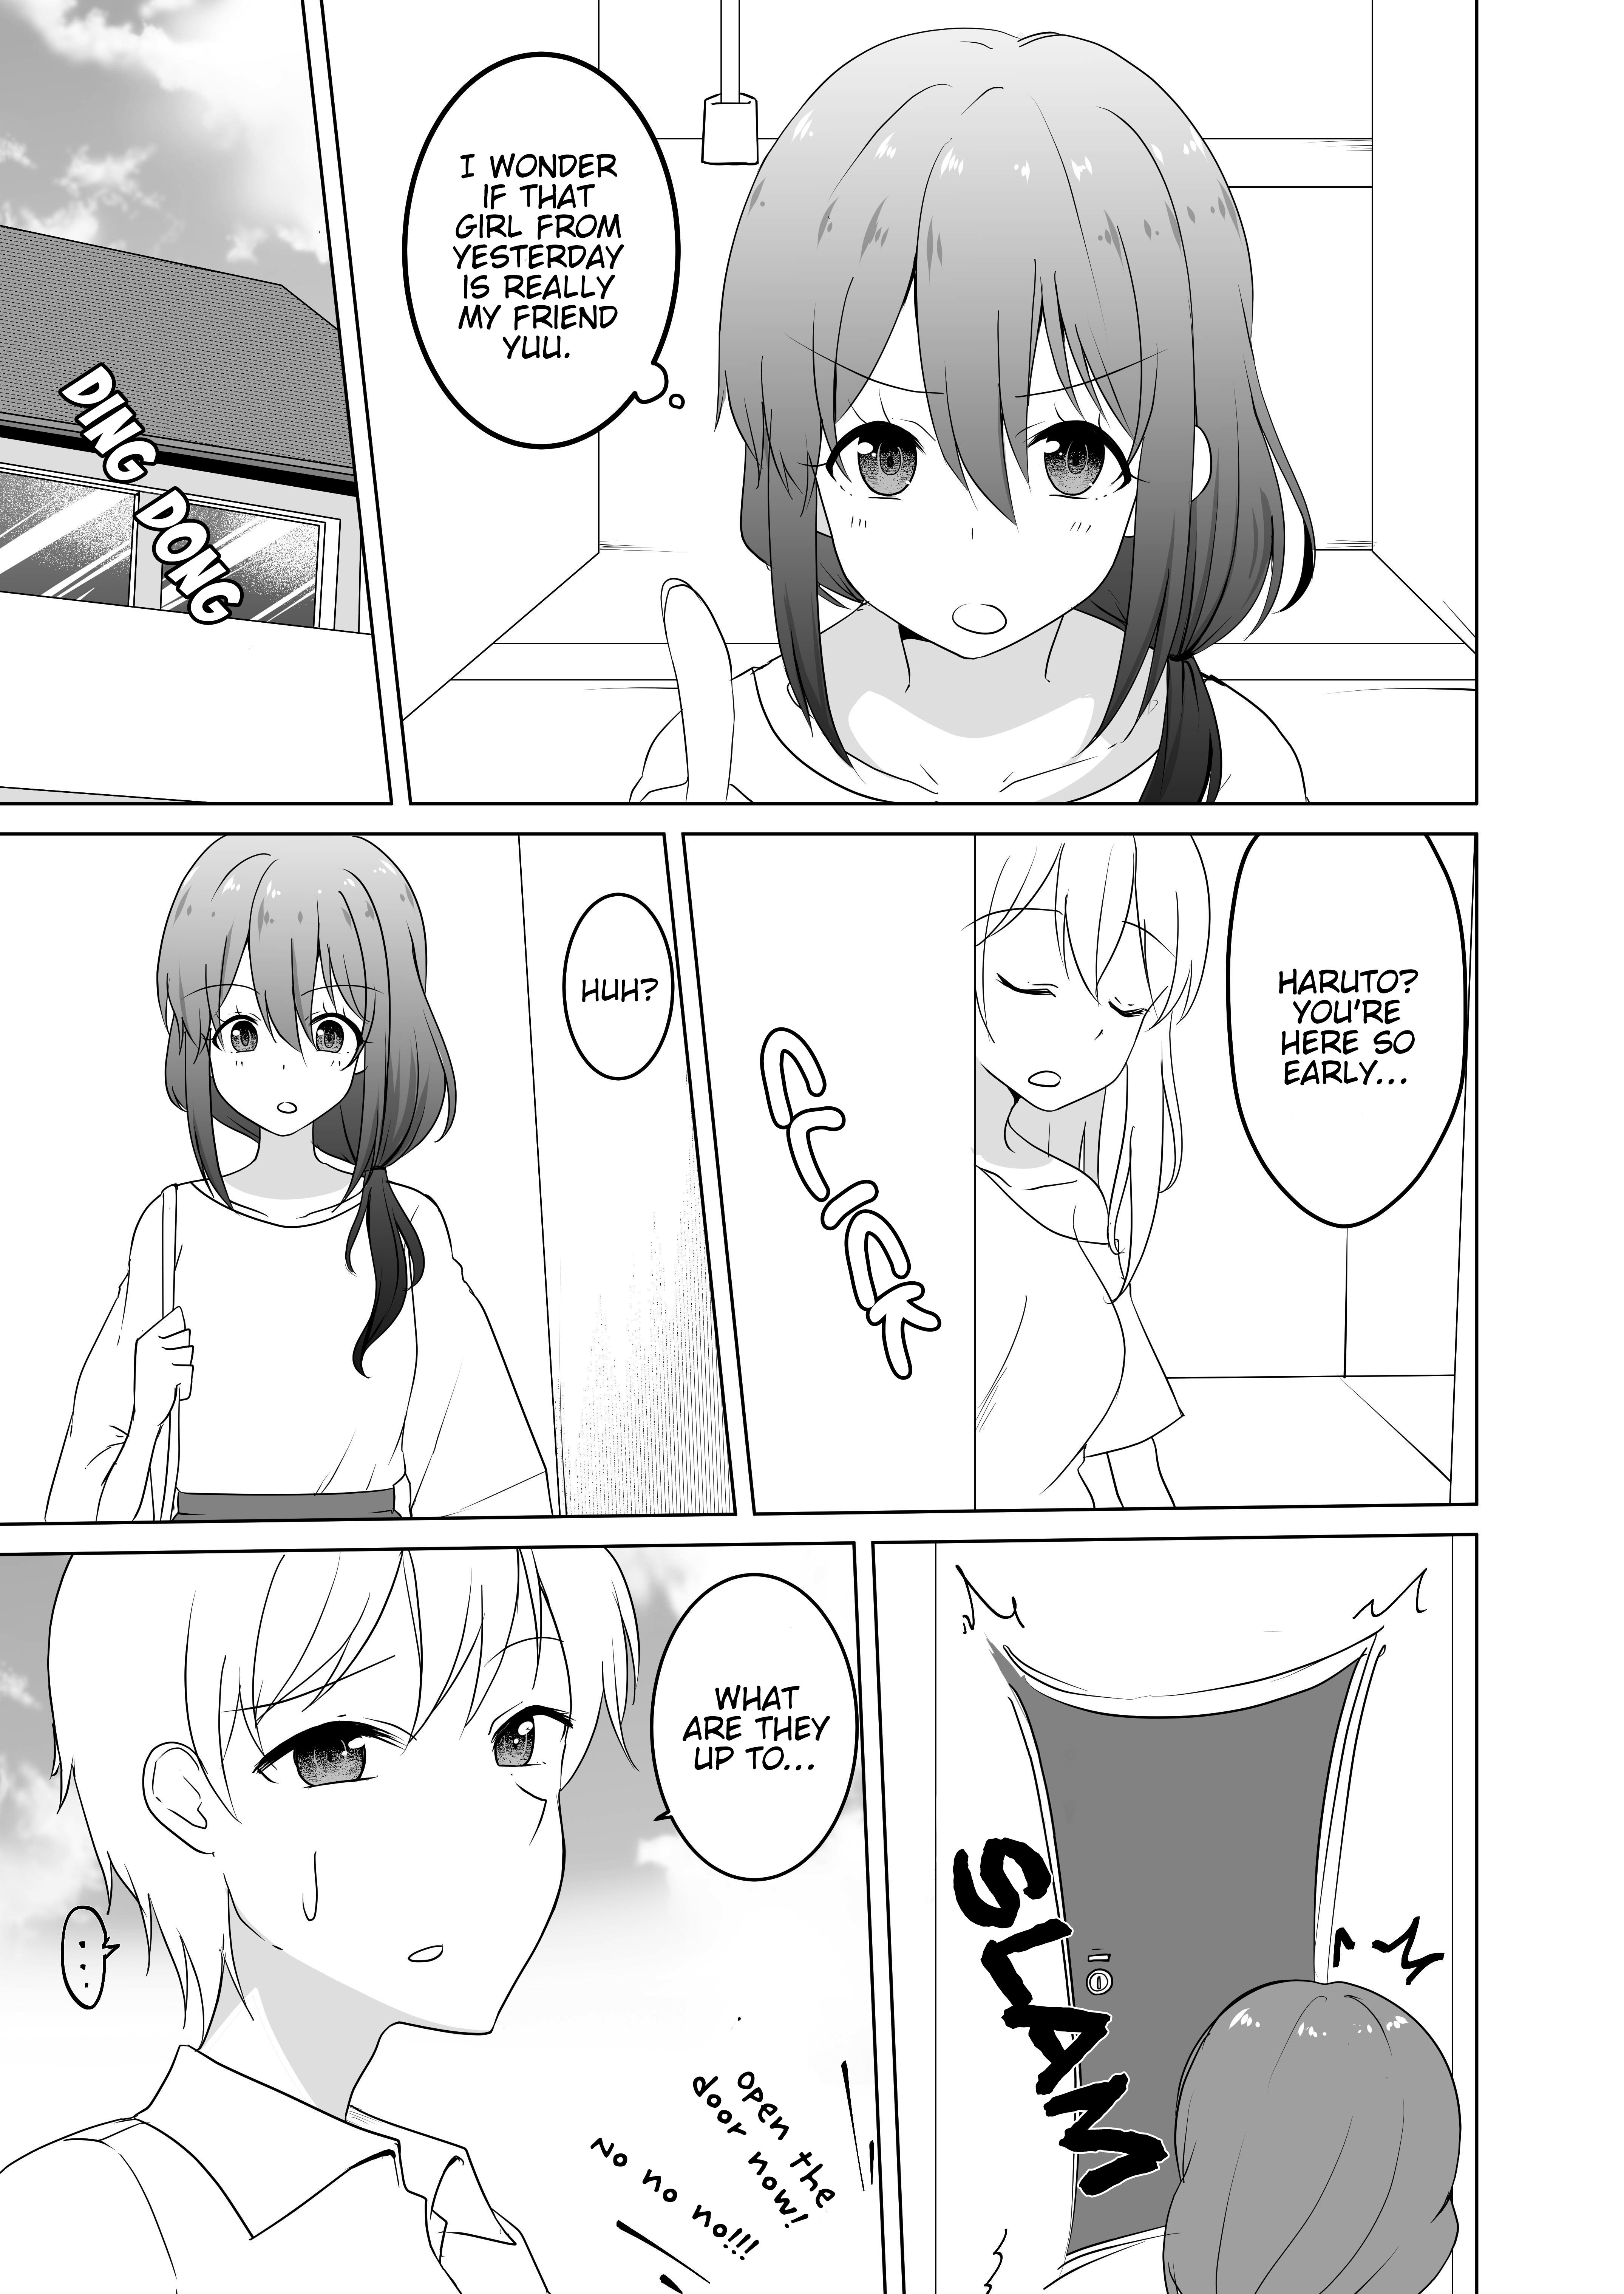 A Boy who Loves Genderswap got Genderswapped so He acts out His Ideal Genderswap Girl - chapter 12 - #1